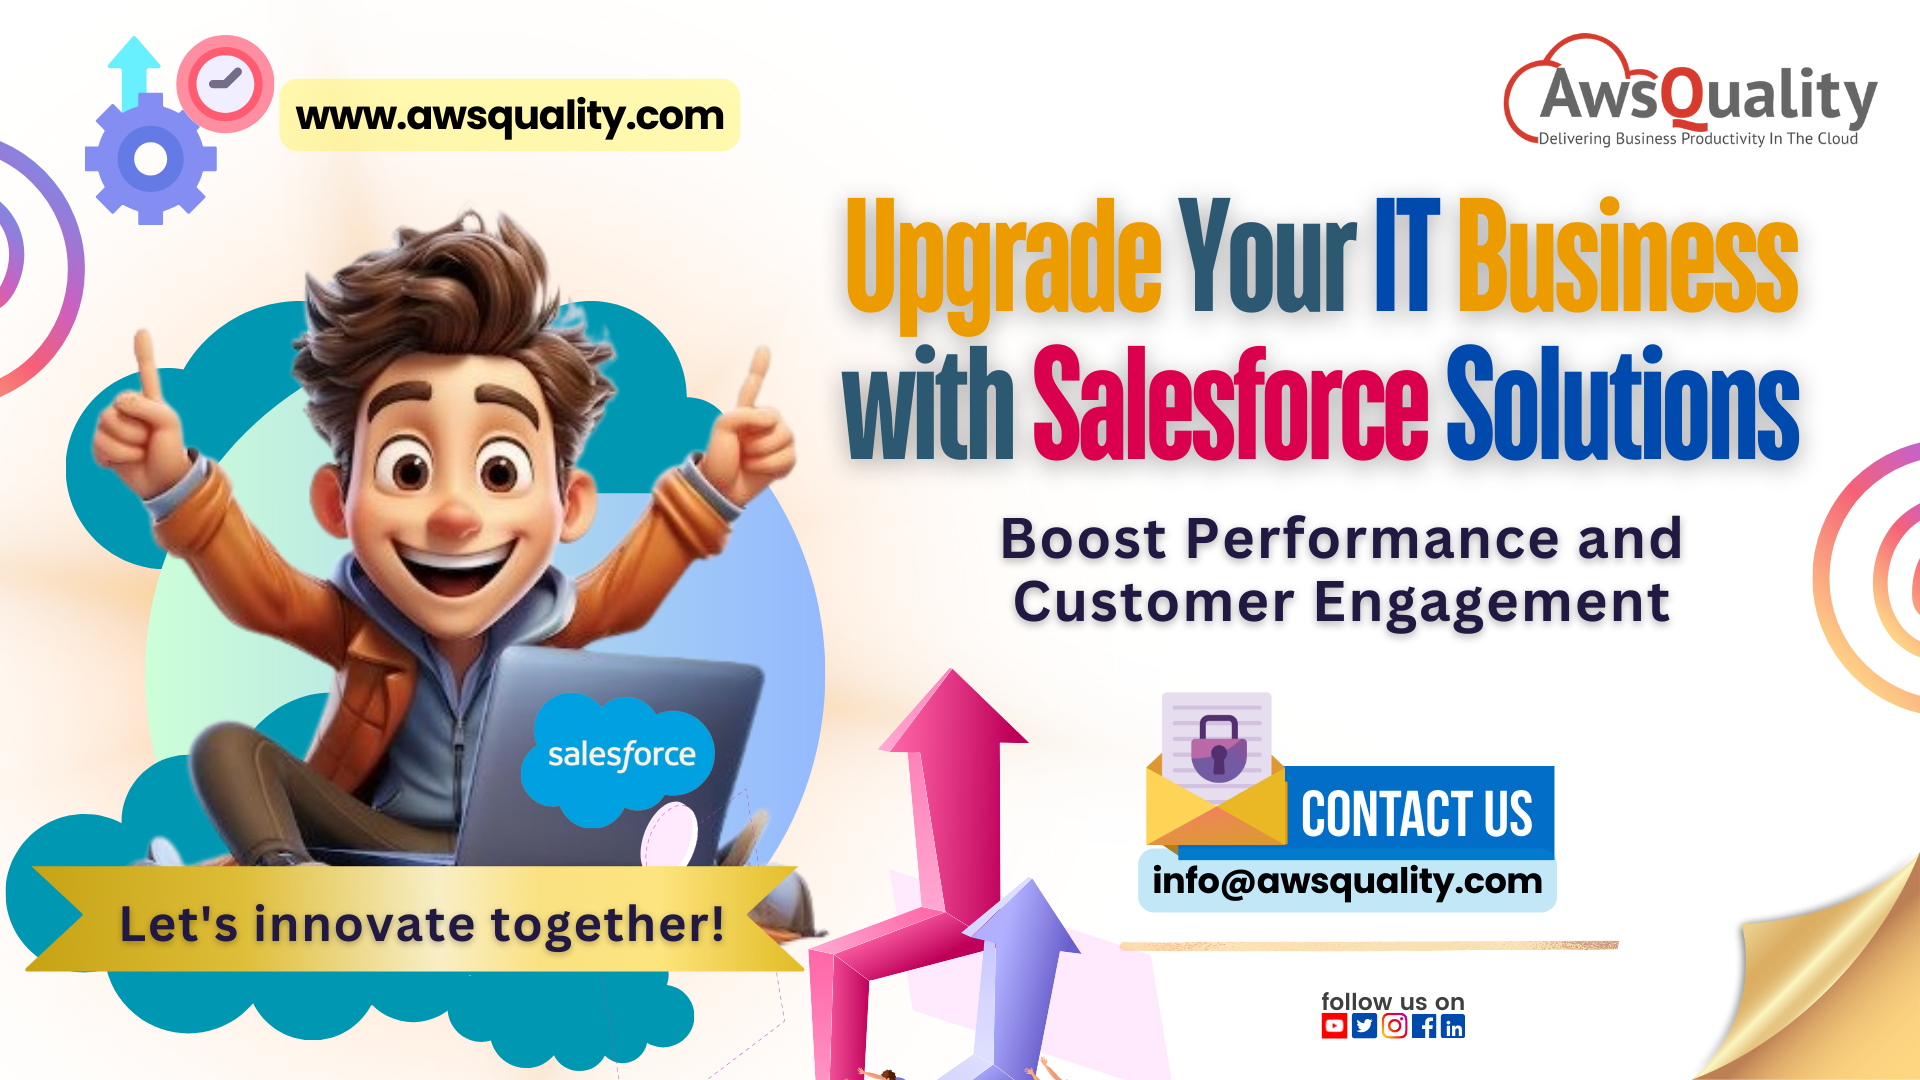 Salesforce solutions for IT industry